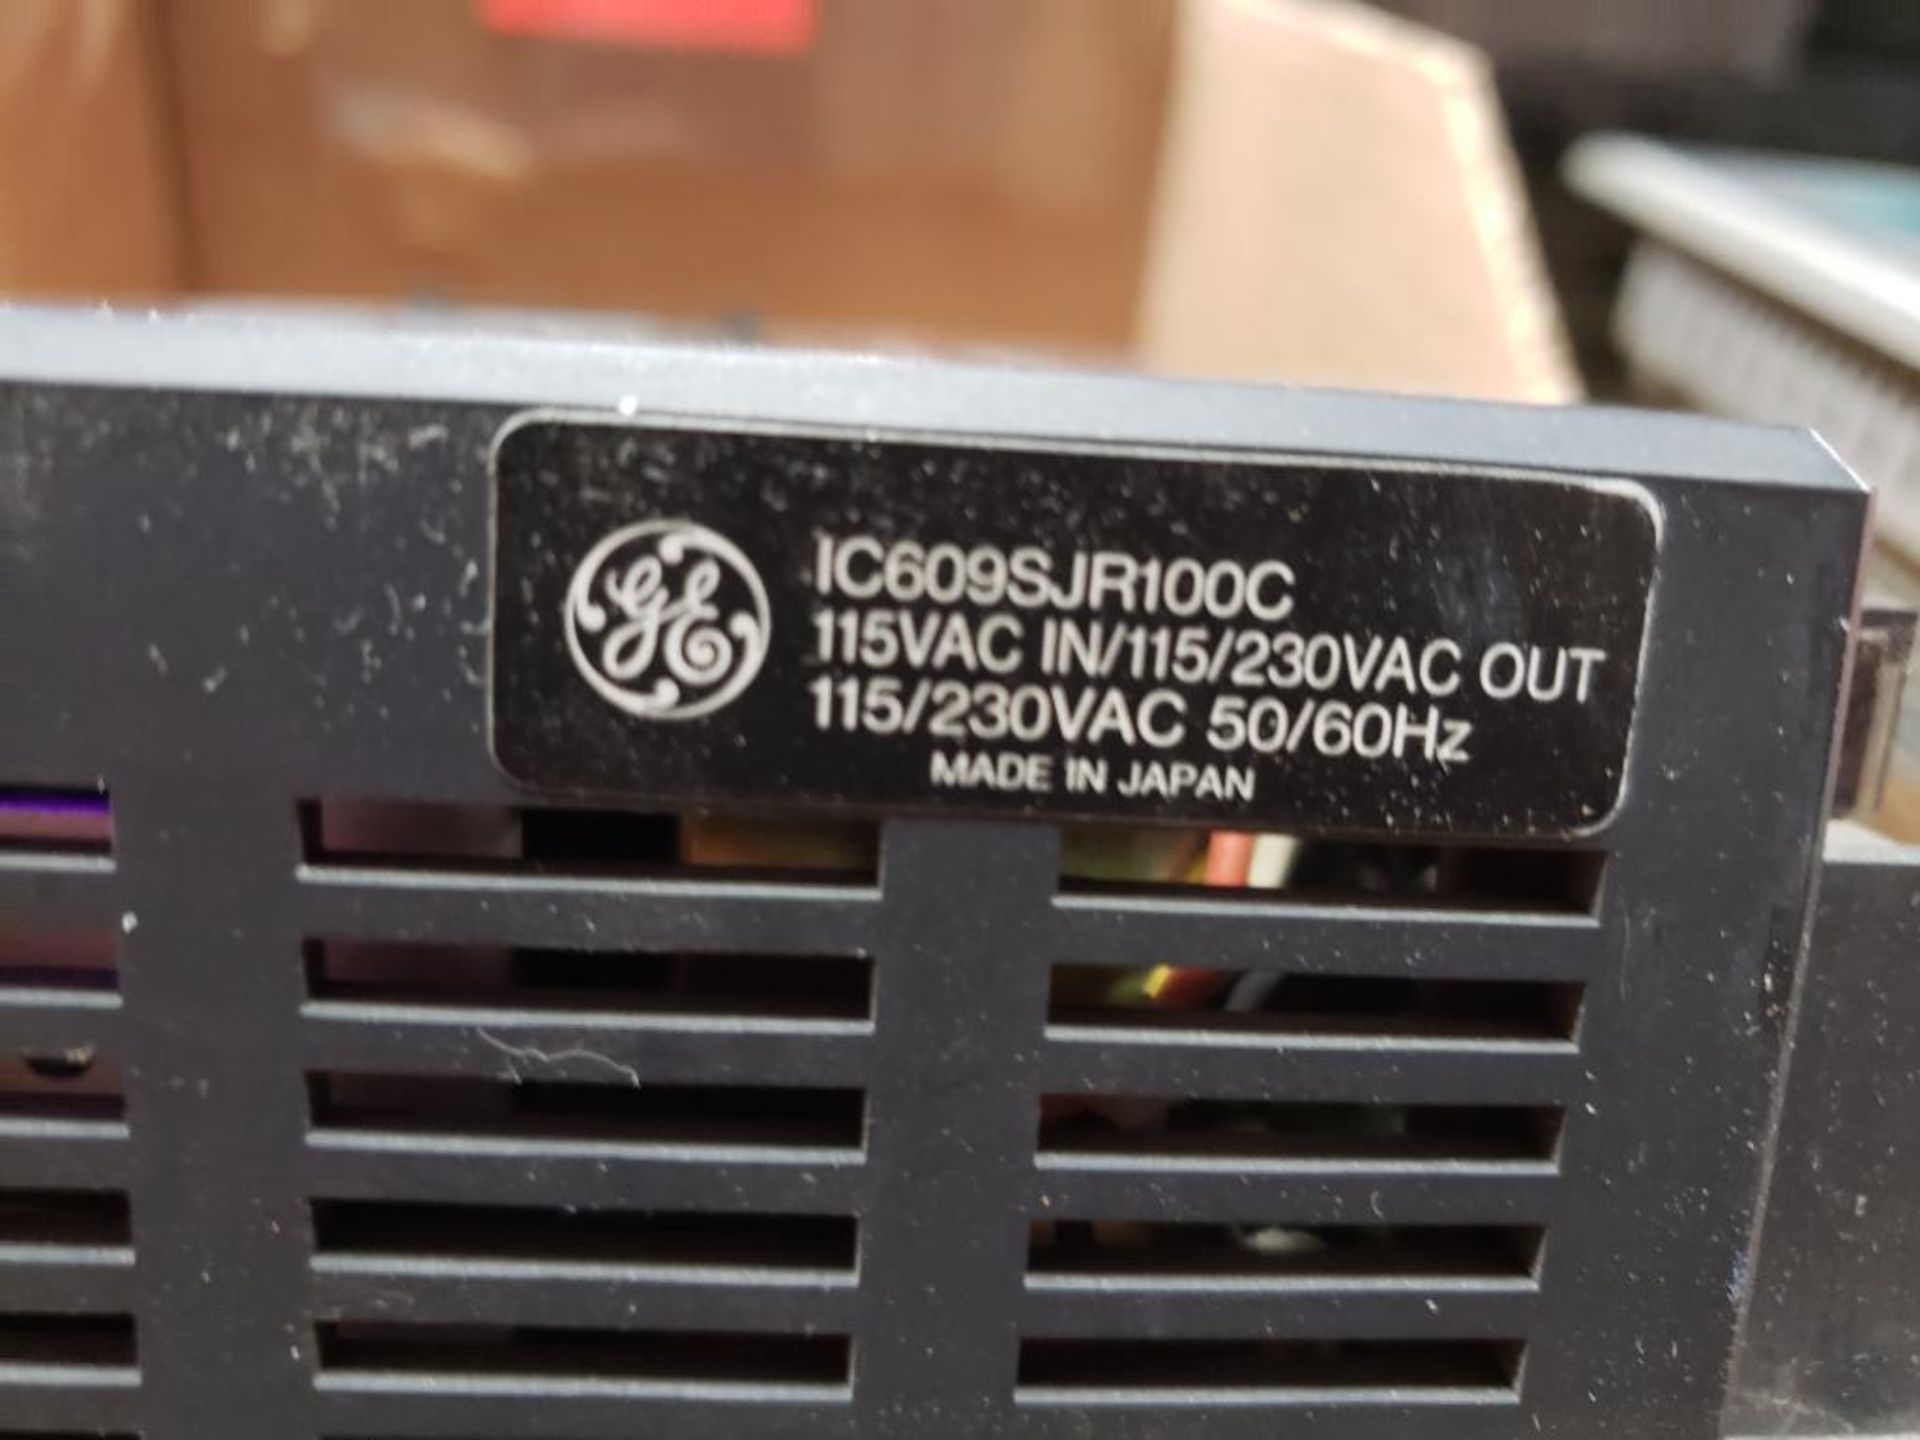 GE SERIES ONE Junior programmable controller. IC609SJR100C. - Image 5 of 5